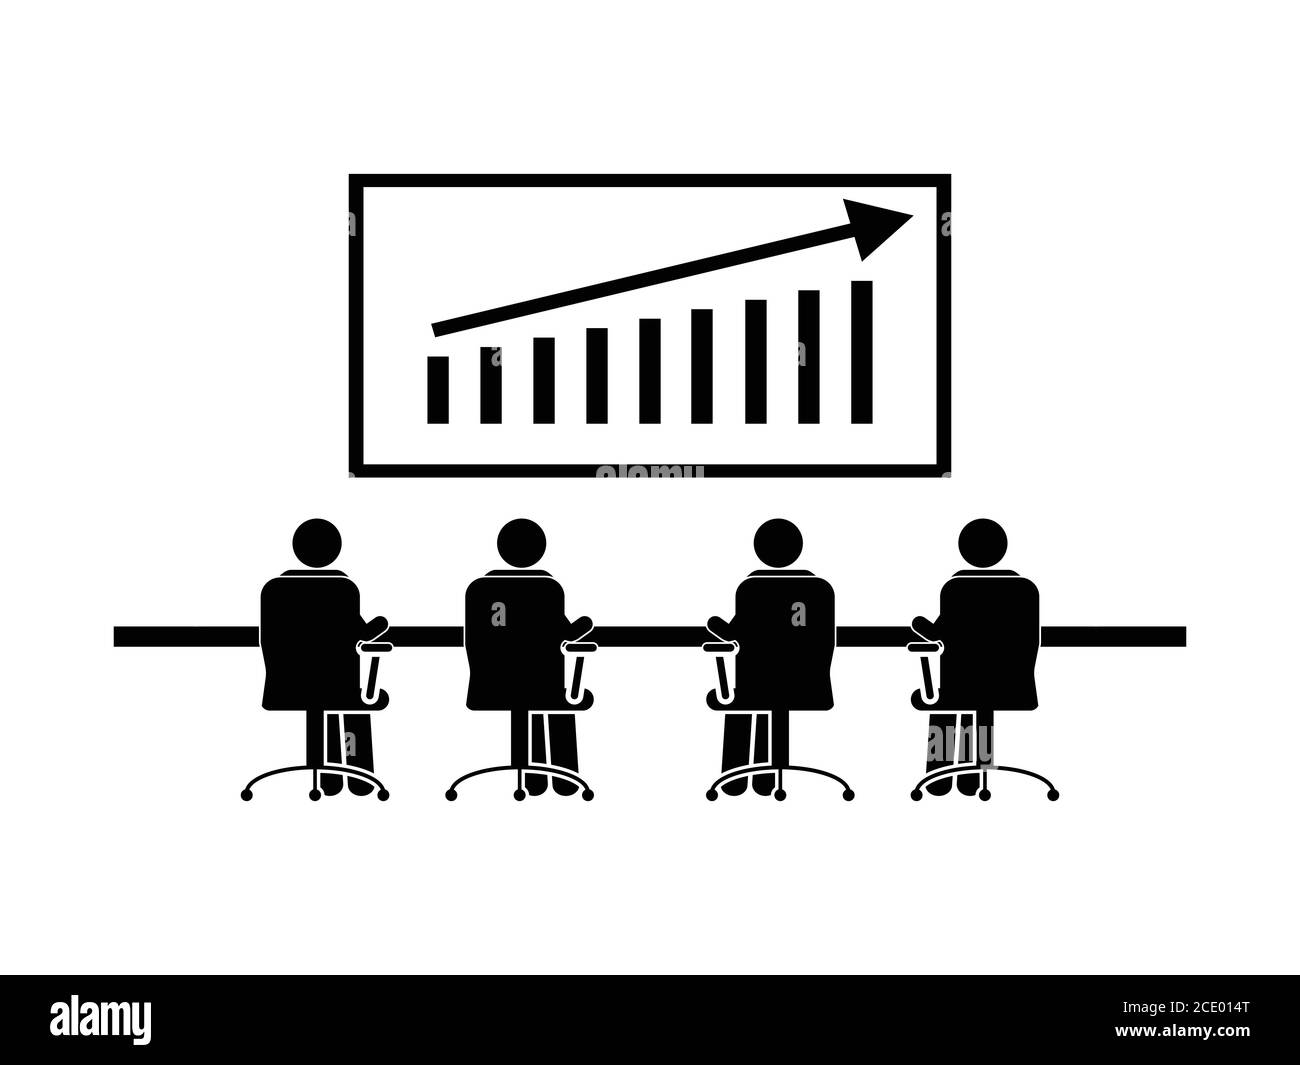 Team Business Sales Meeting. Pictogram depicting group corporate company meeting discussing regarding sales profits revenue growth. EPS vector Stock Vector